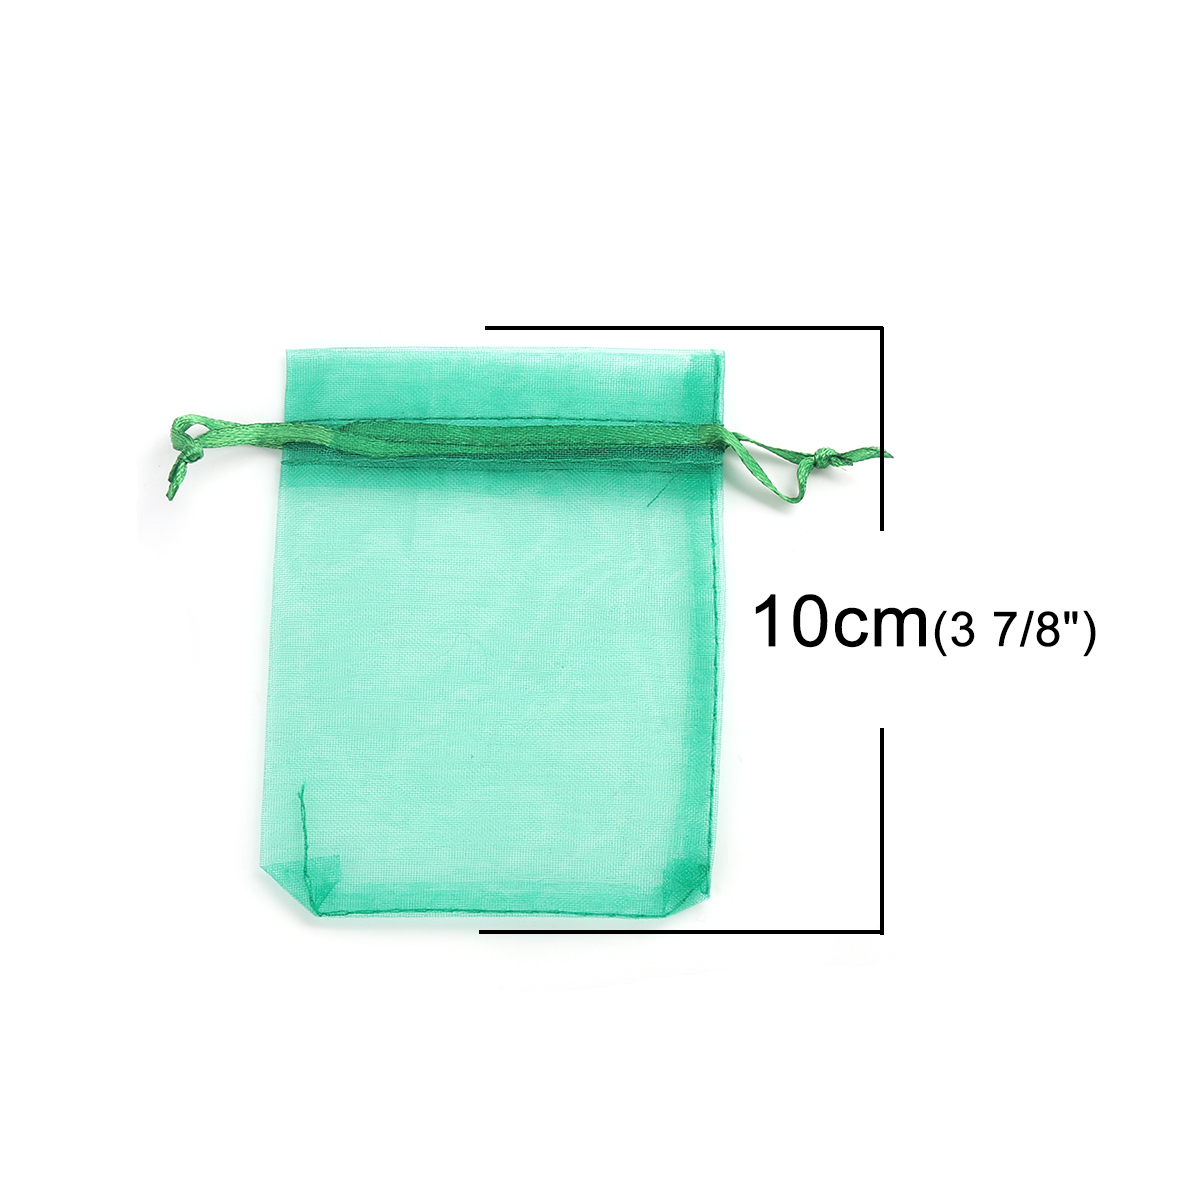 Picture of Wedding Gift Organza Jewelry Bags Drawstring Rectangle Dark Green 10cm x8cm(3 7/8" x3 1/8"), (Usable Space: 8x8cm) 30 PCs